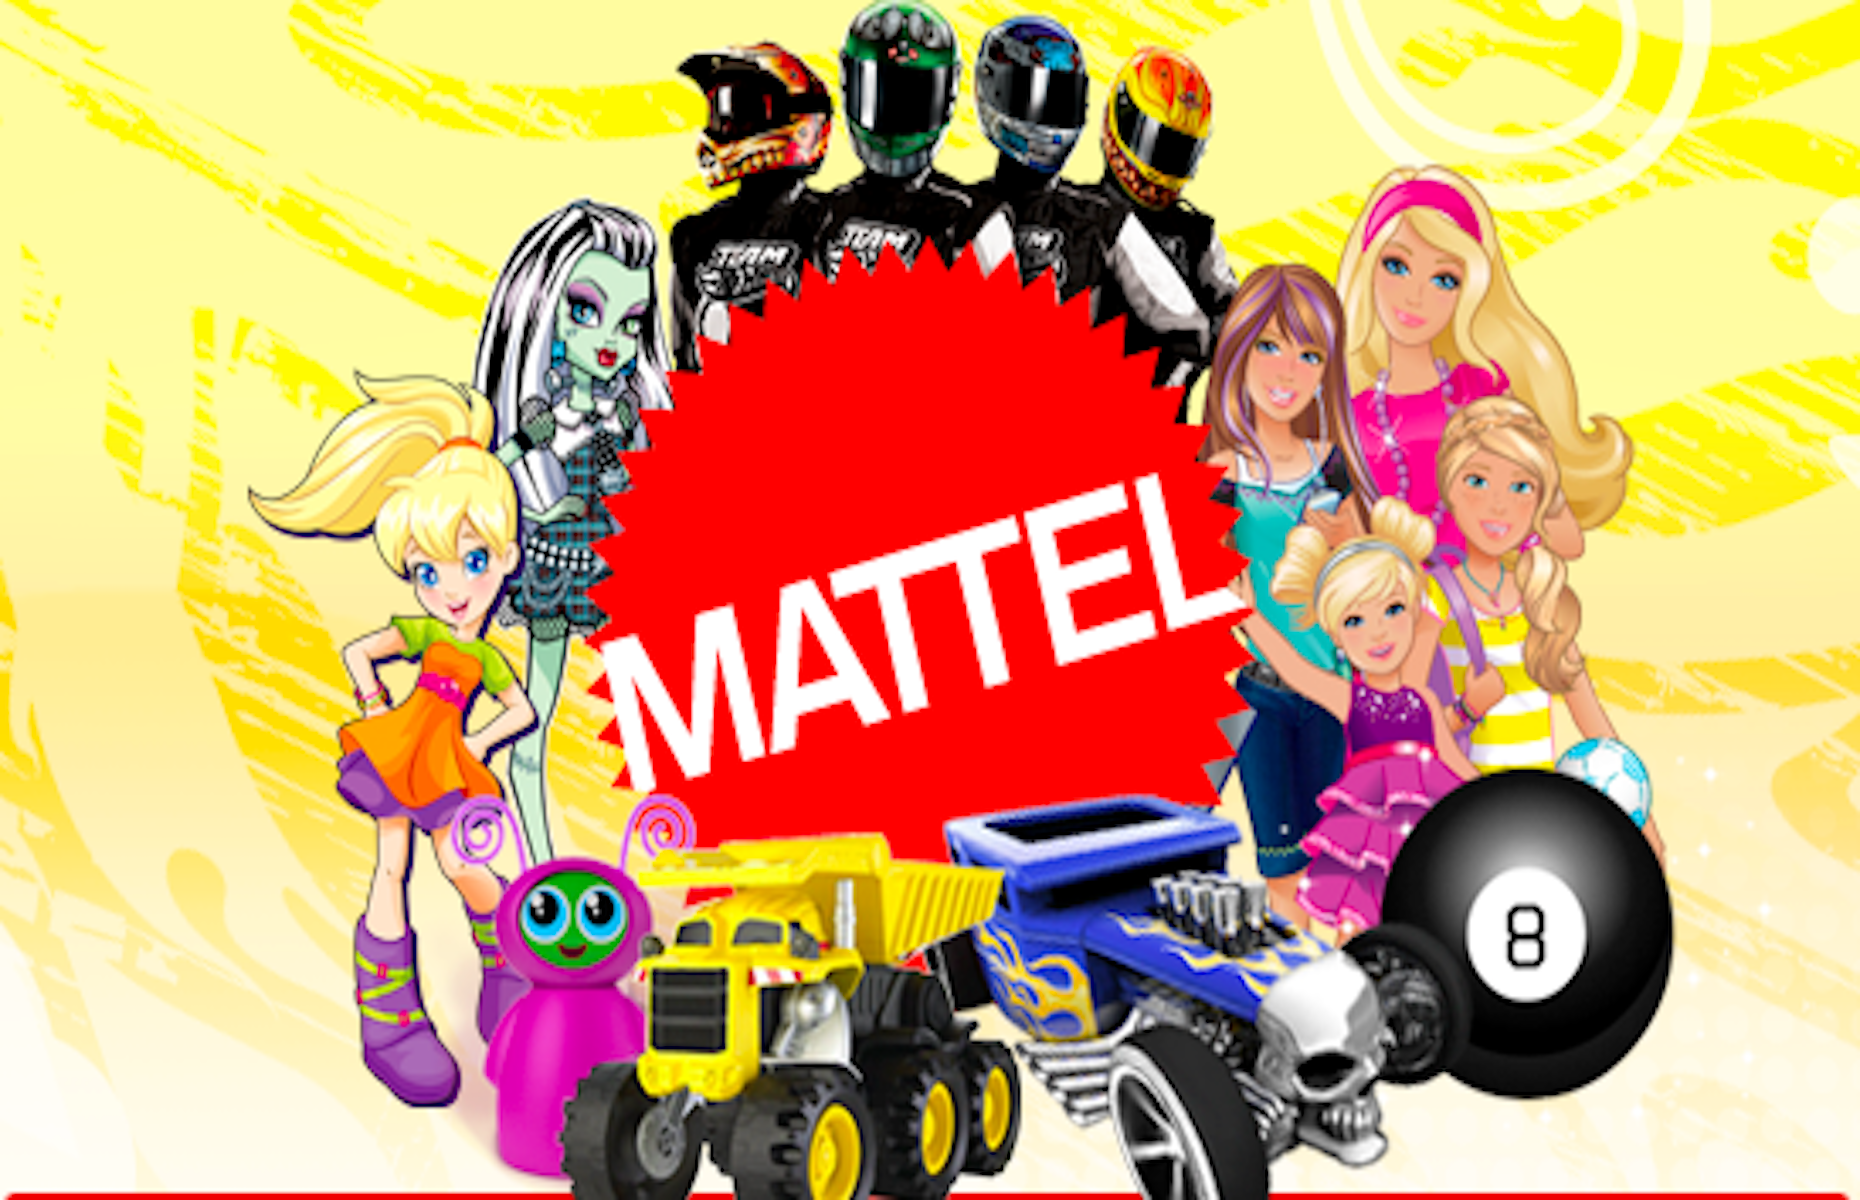 There's all to play for at Mattel